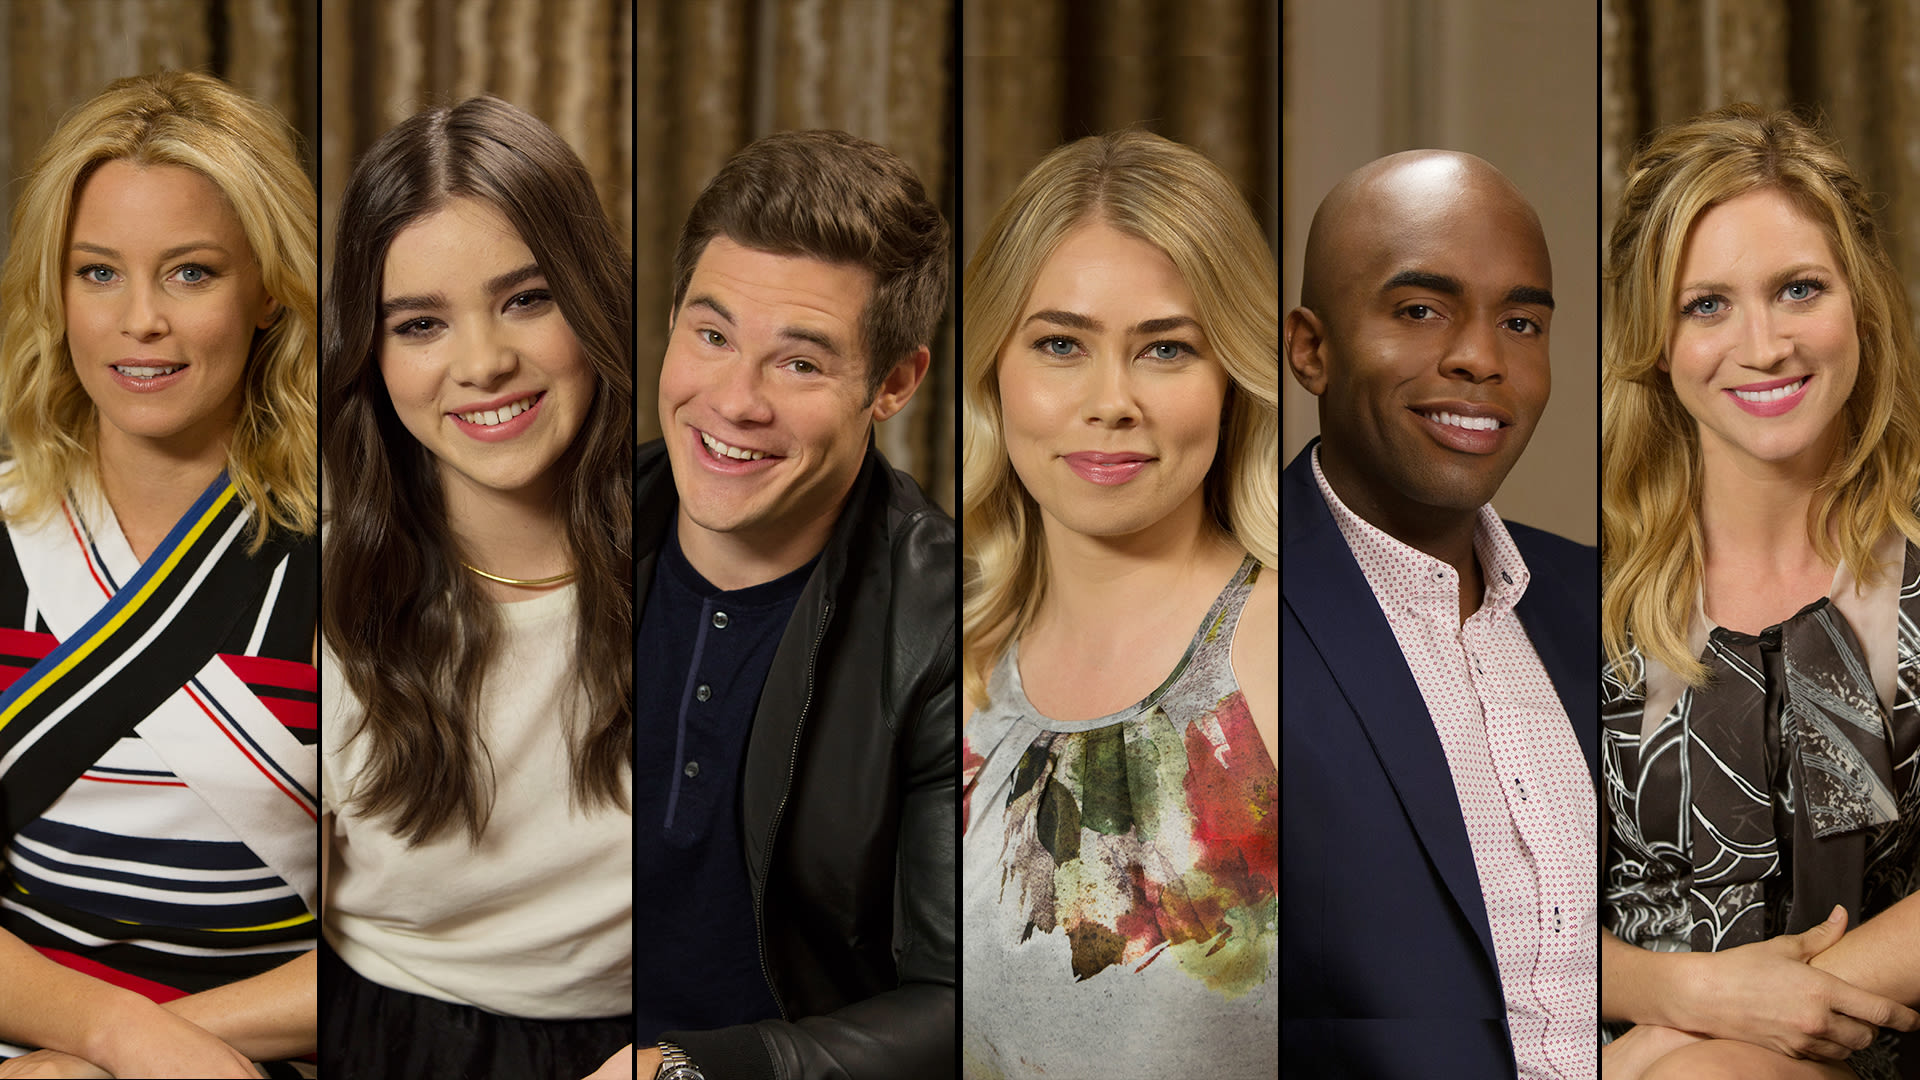 Watch The Cast of Pitch Perfect 2 Share Their Tips for the Perfect Prom  Pose